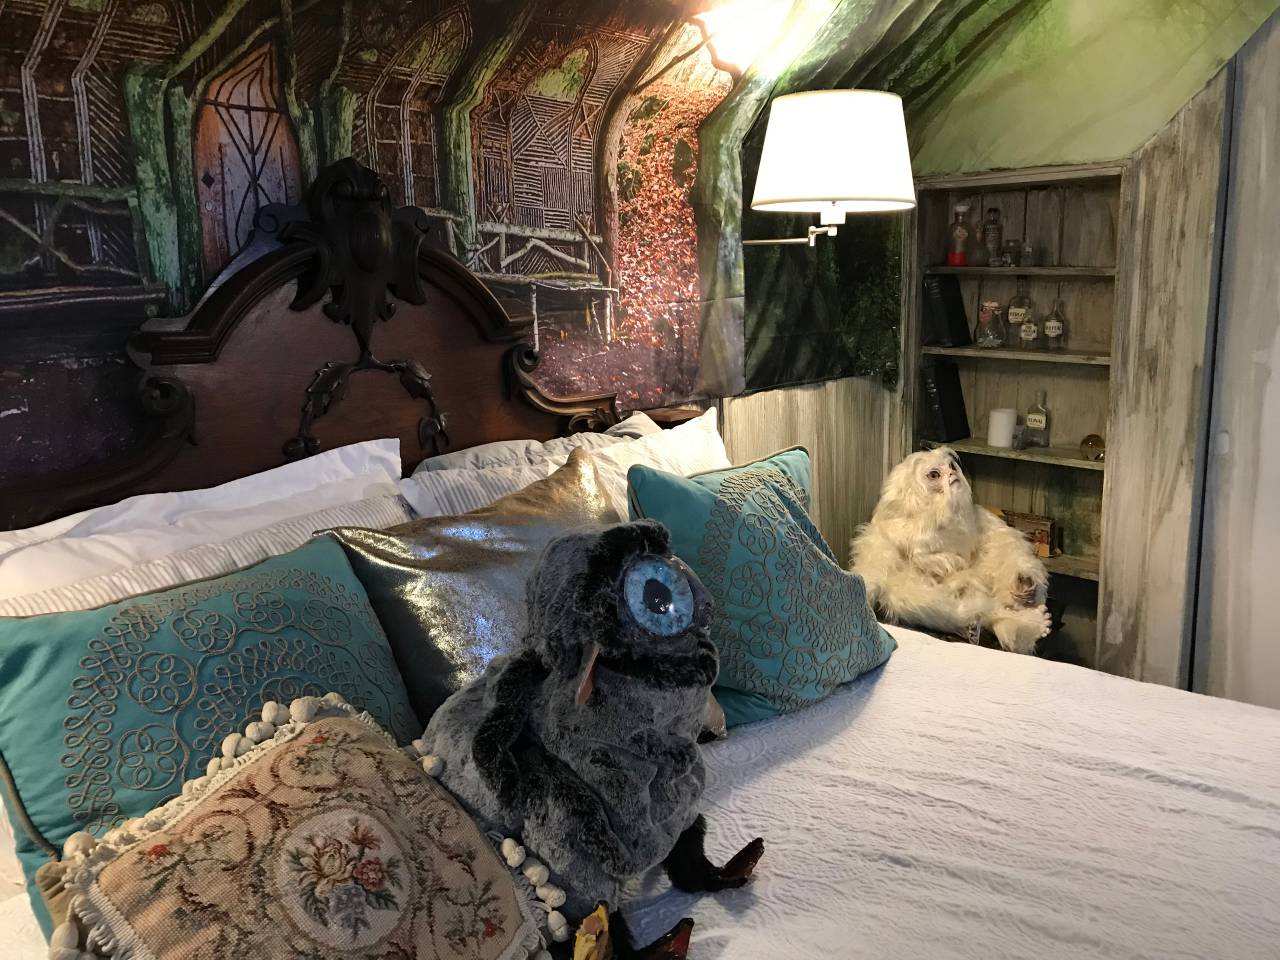 The Harry Potter Themed Airbnb In Massachusetts Is A Dream Getaway For Potterheads Of All Ages